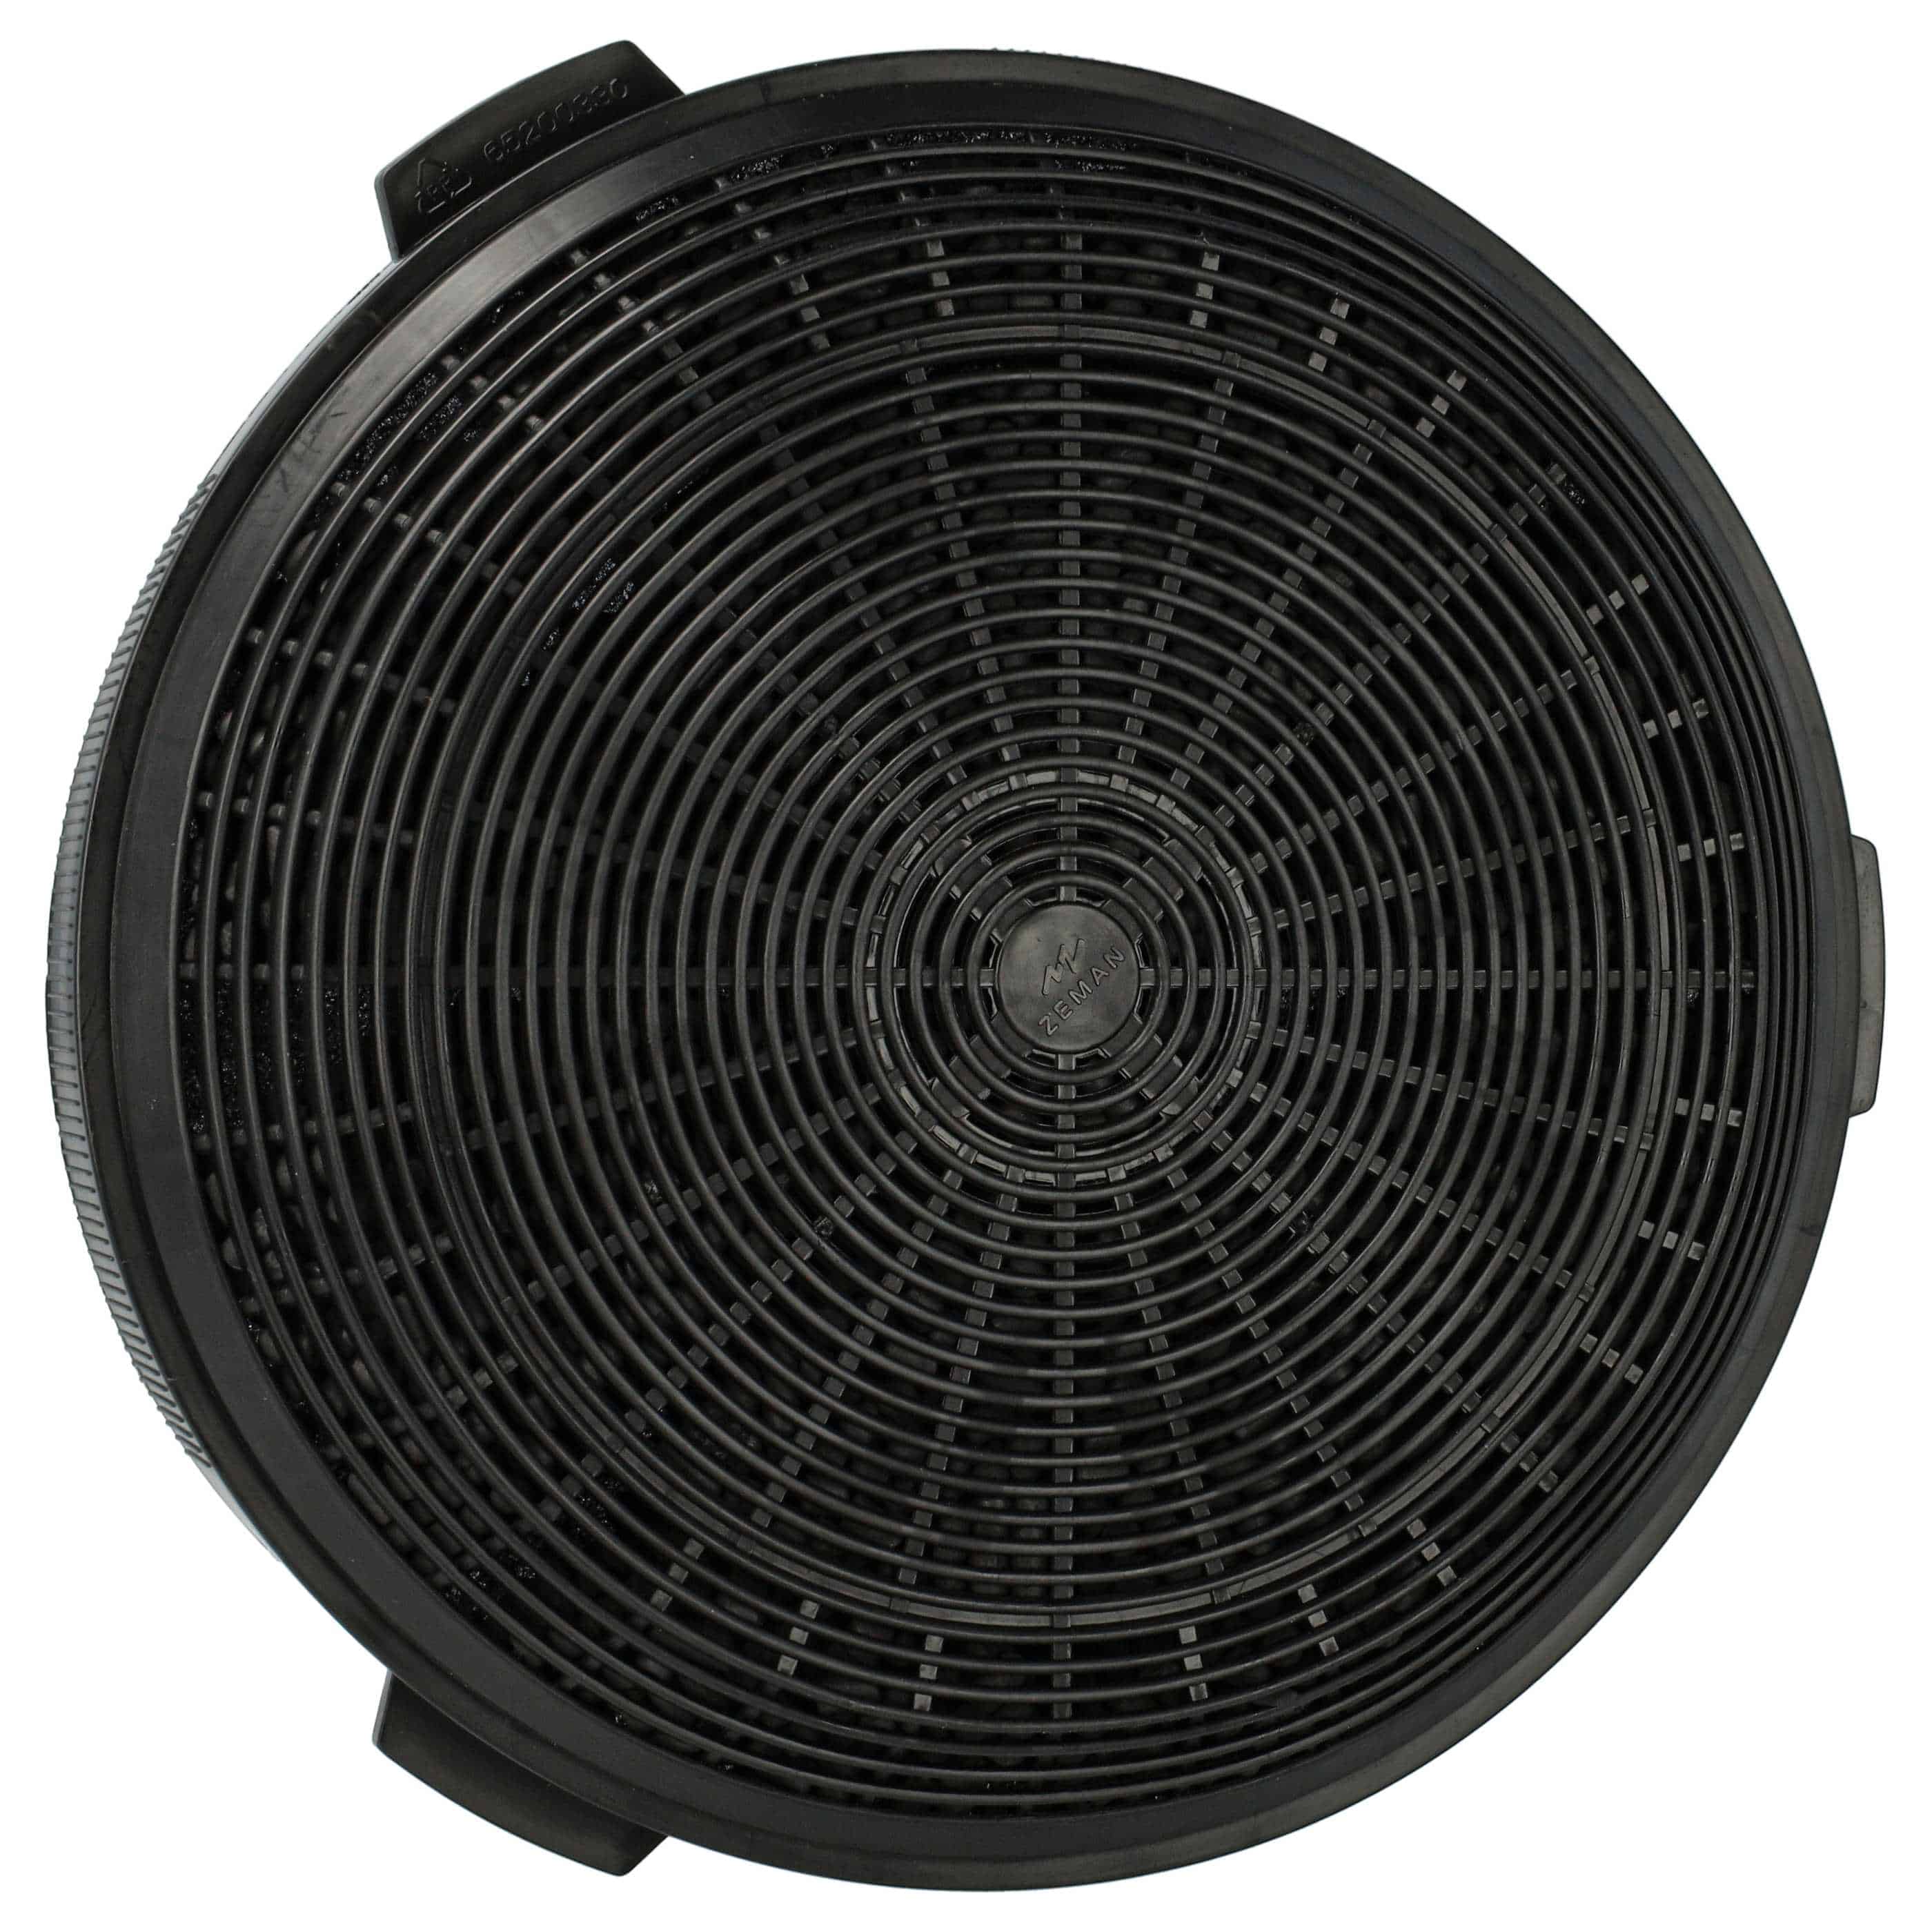 Activated Carbon Filter as Replacement for Electrolux E251005 for Electrolux Hob etc. - 18.85 cm